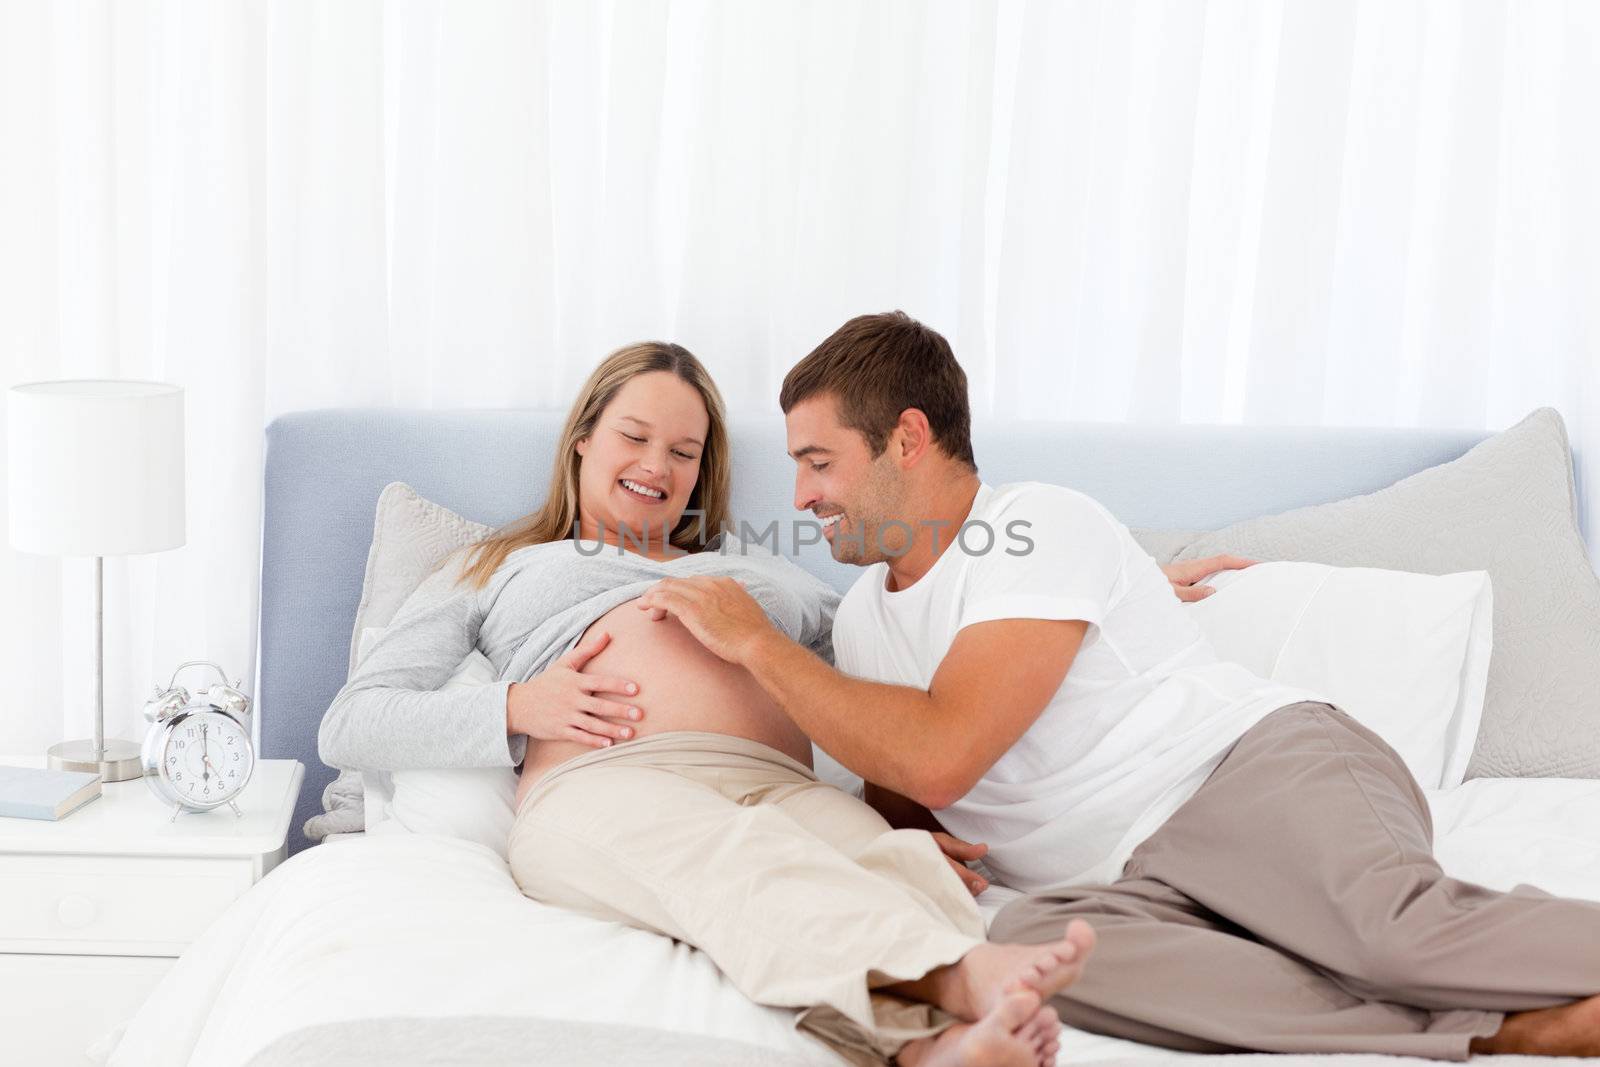 Cute man playing with his pregnant wife while relaxing on the bedroom